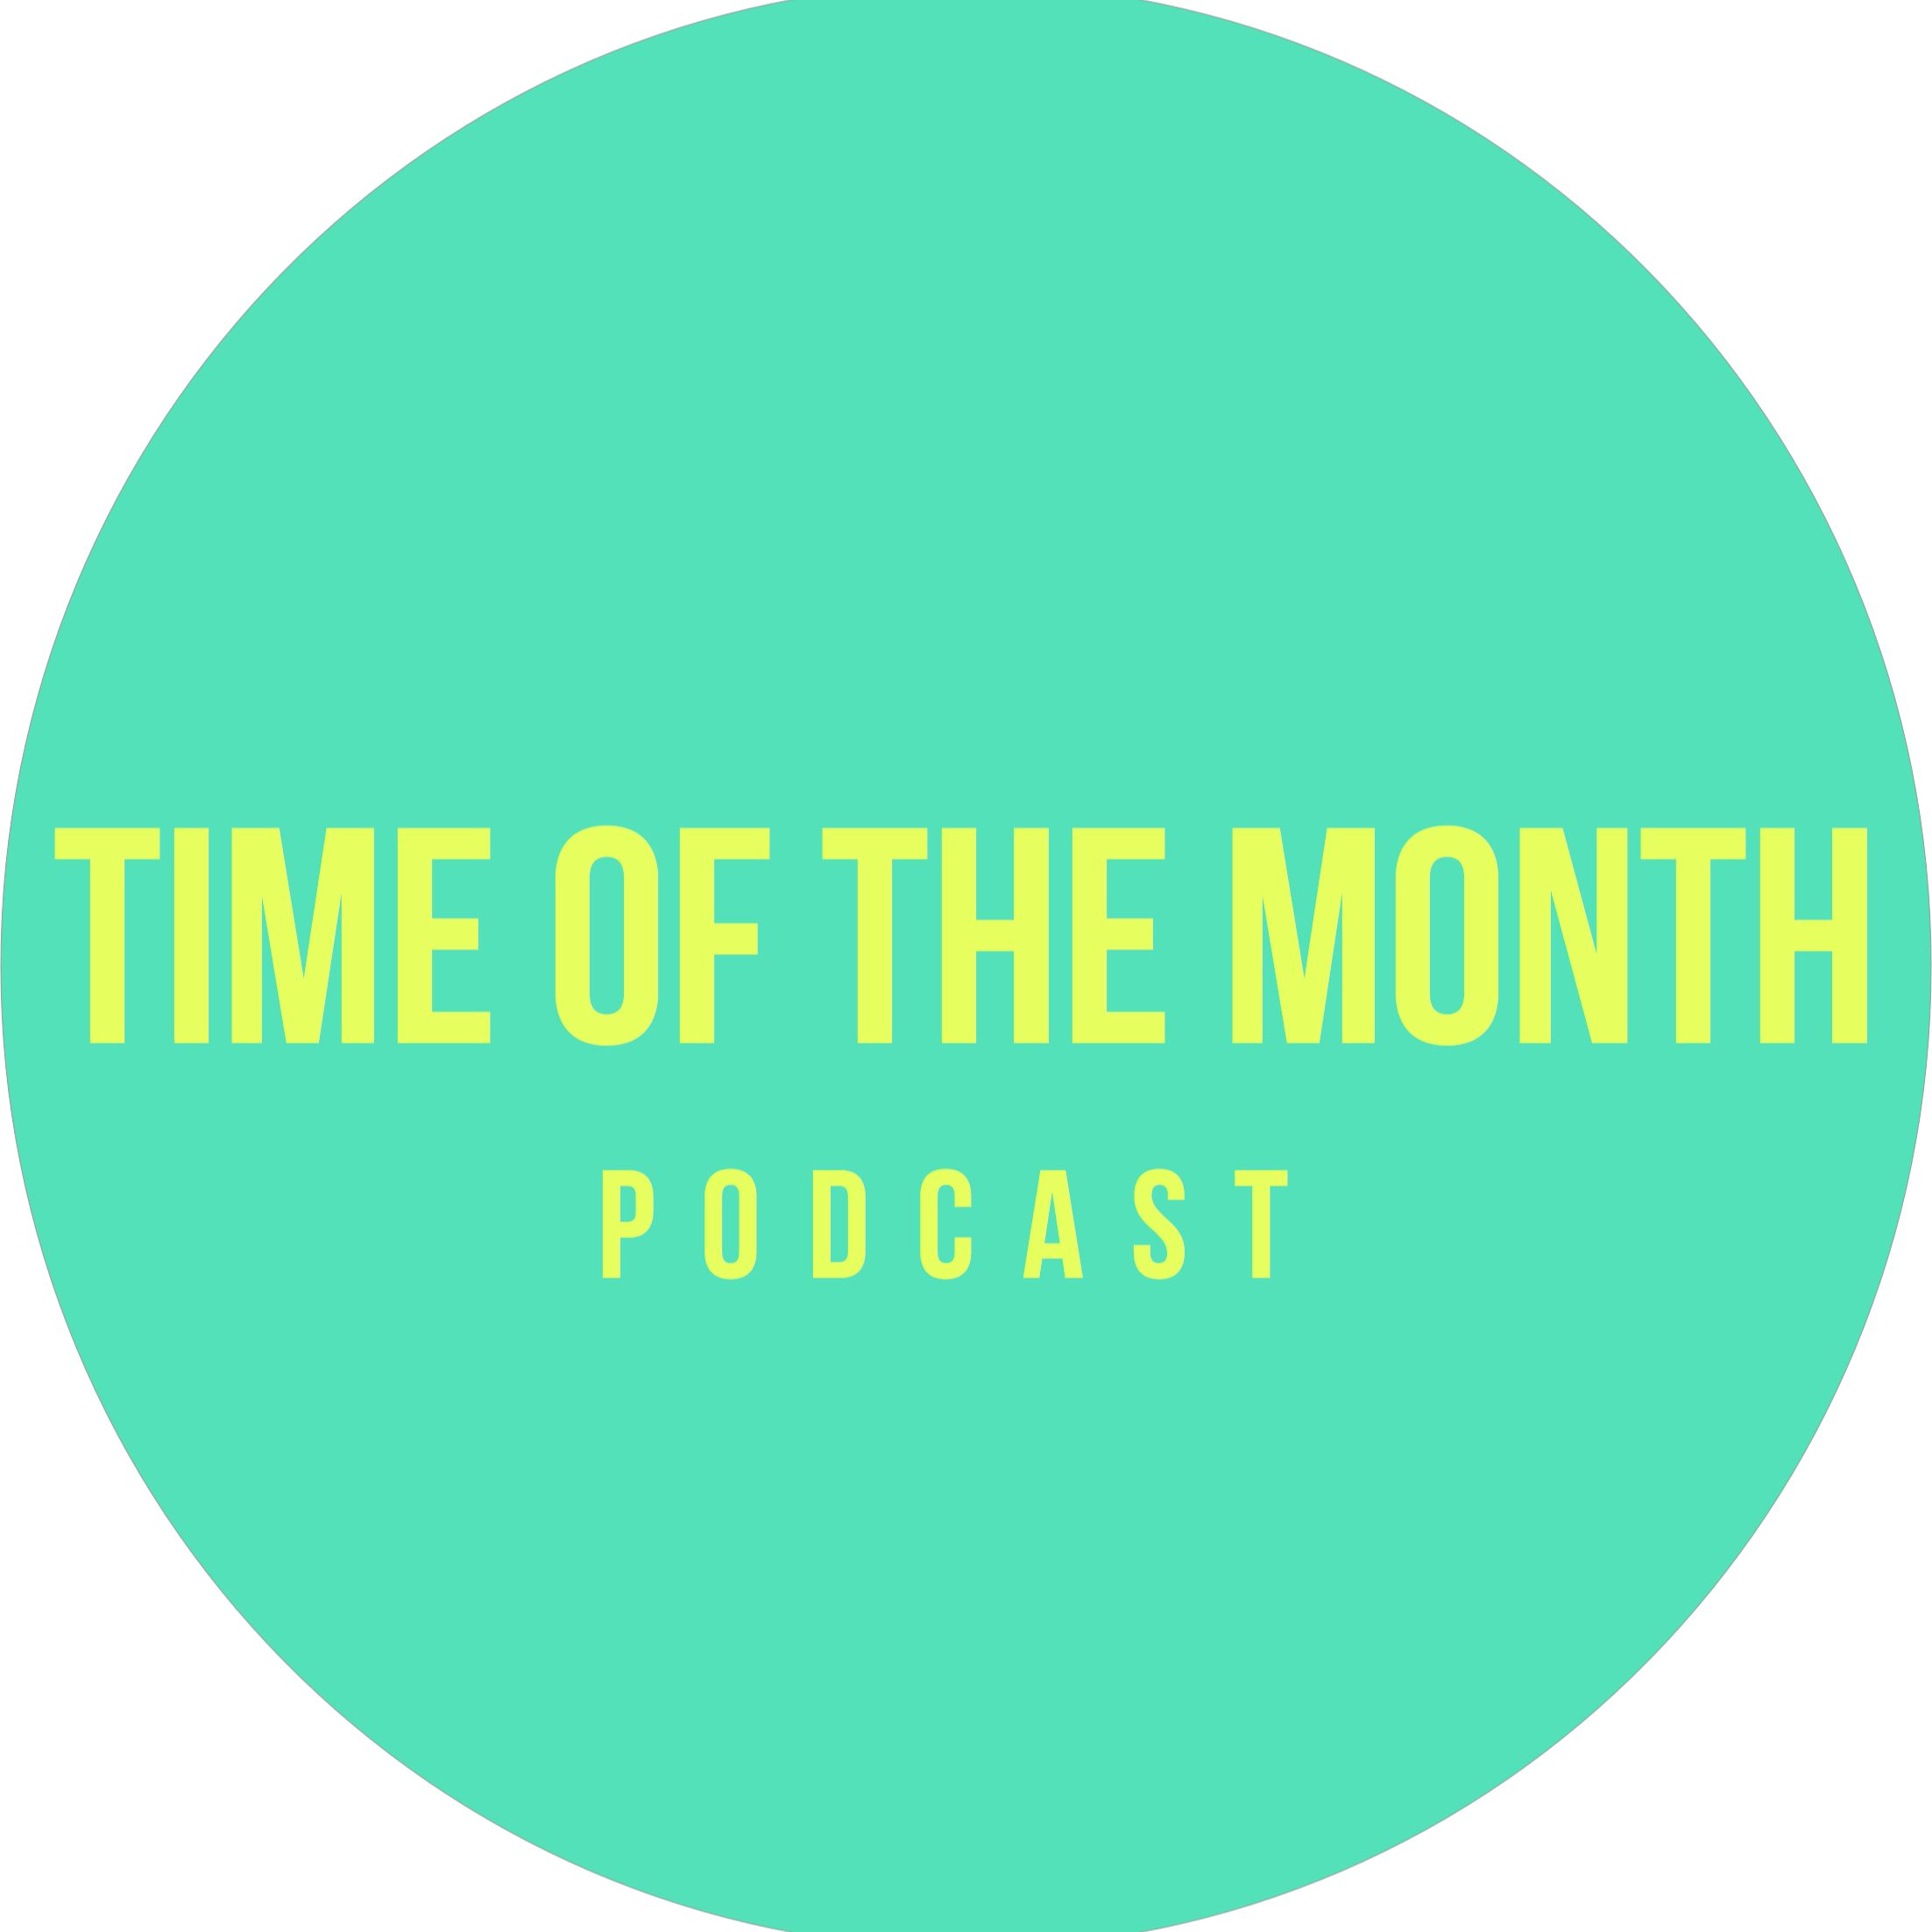 Time of The Month EP 1 - Finding Your Sound